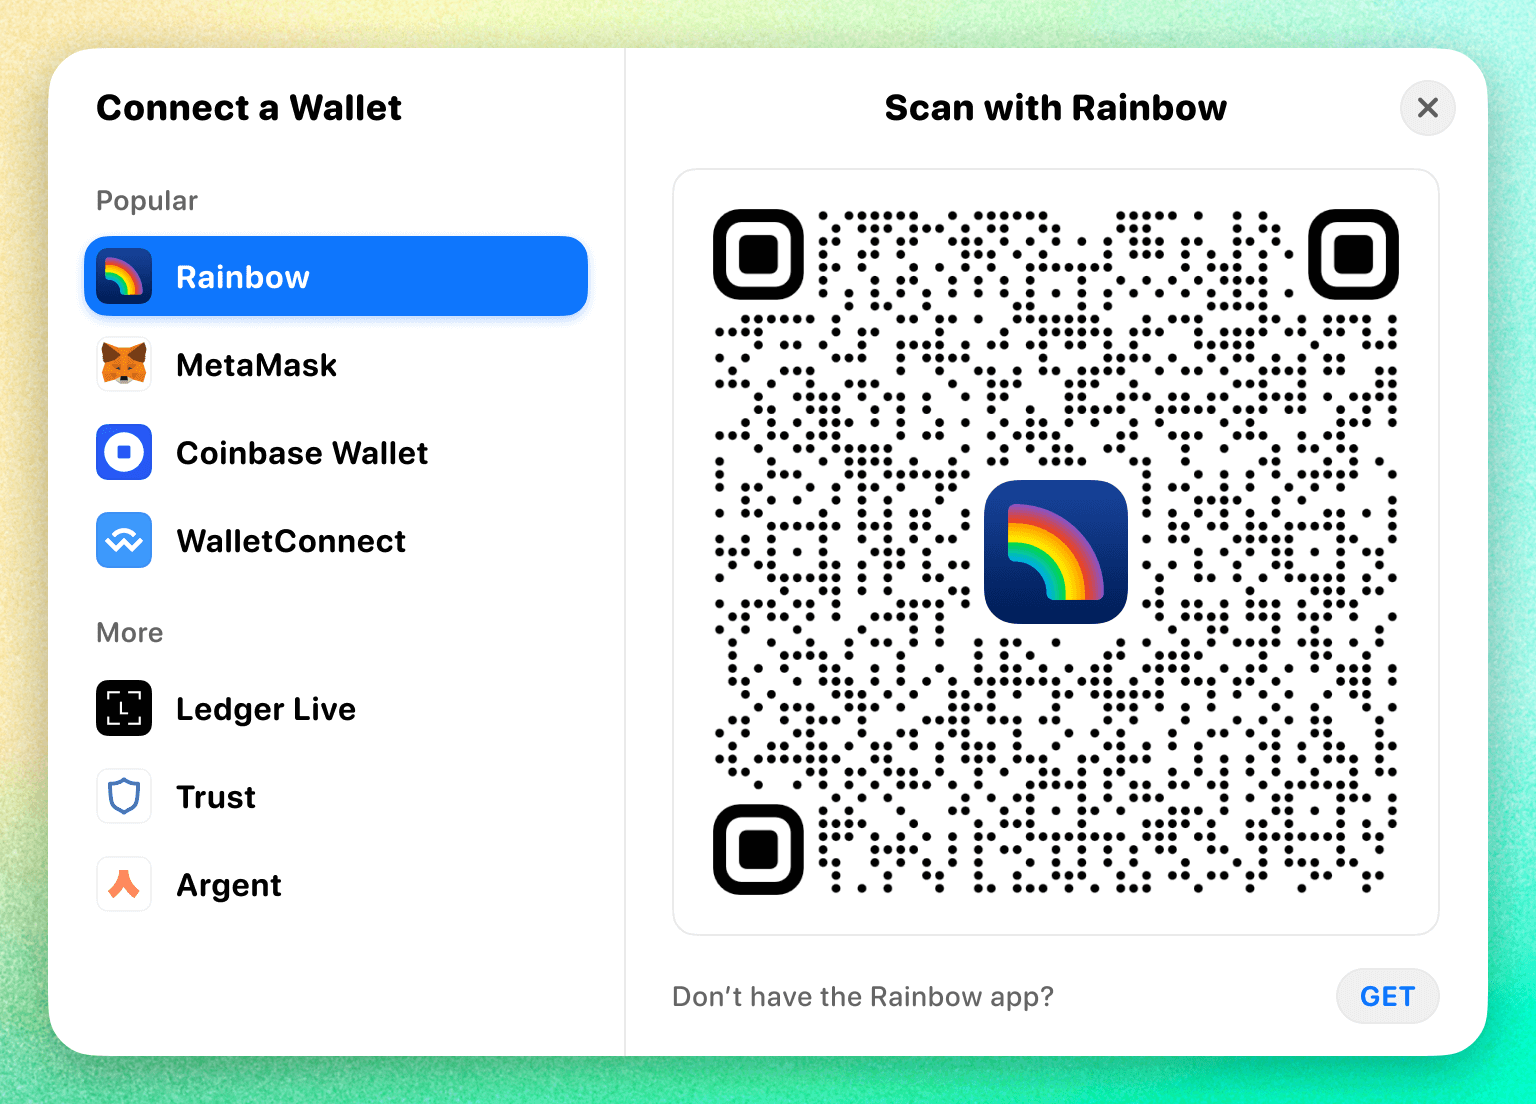 RainbowKit's wallet list displaying lots of wallets into two seperate groups.